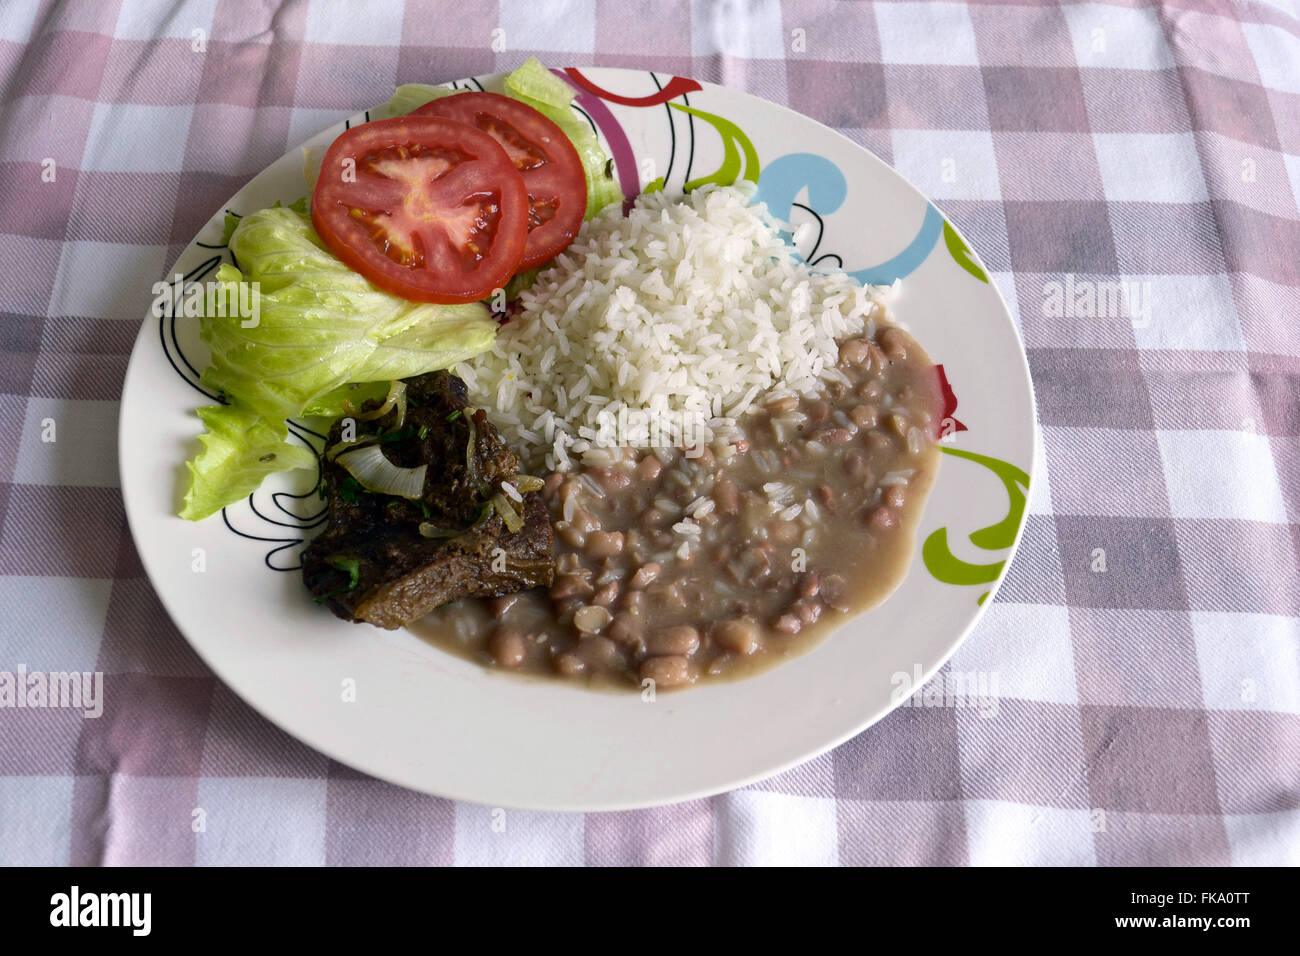 Plate of rice, beans, meat and salad Stock Photo